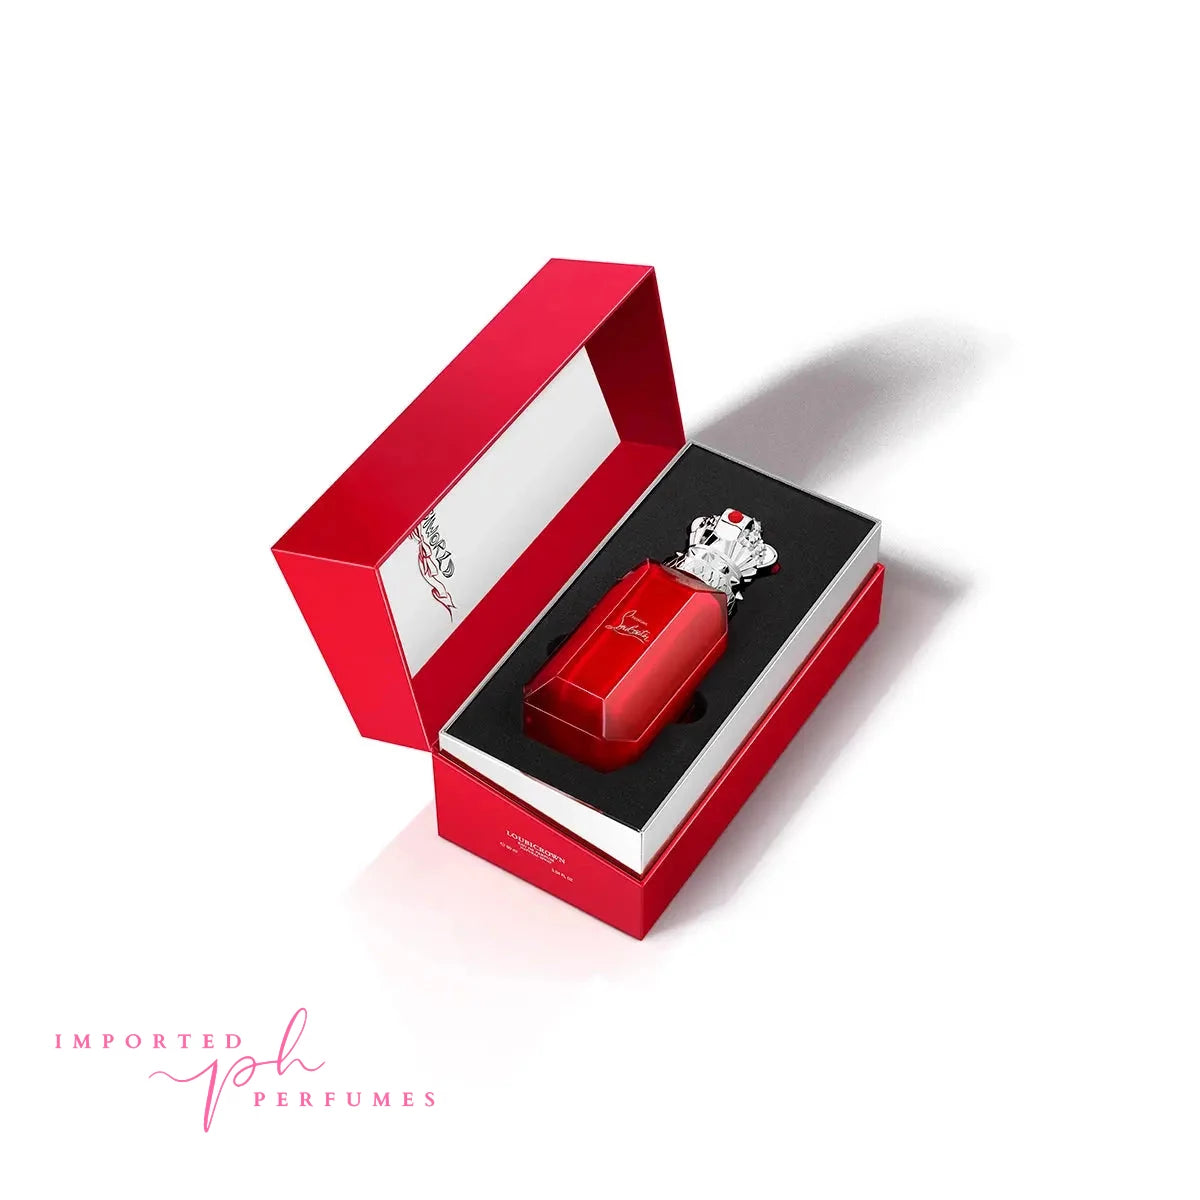 Christian Louboutin Loubicrown For Women EDP Imported Perfumes & Beauty Store